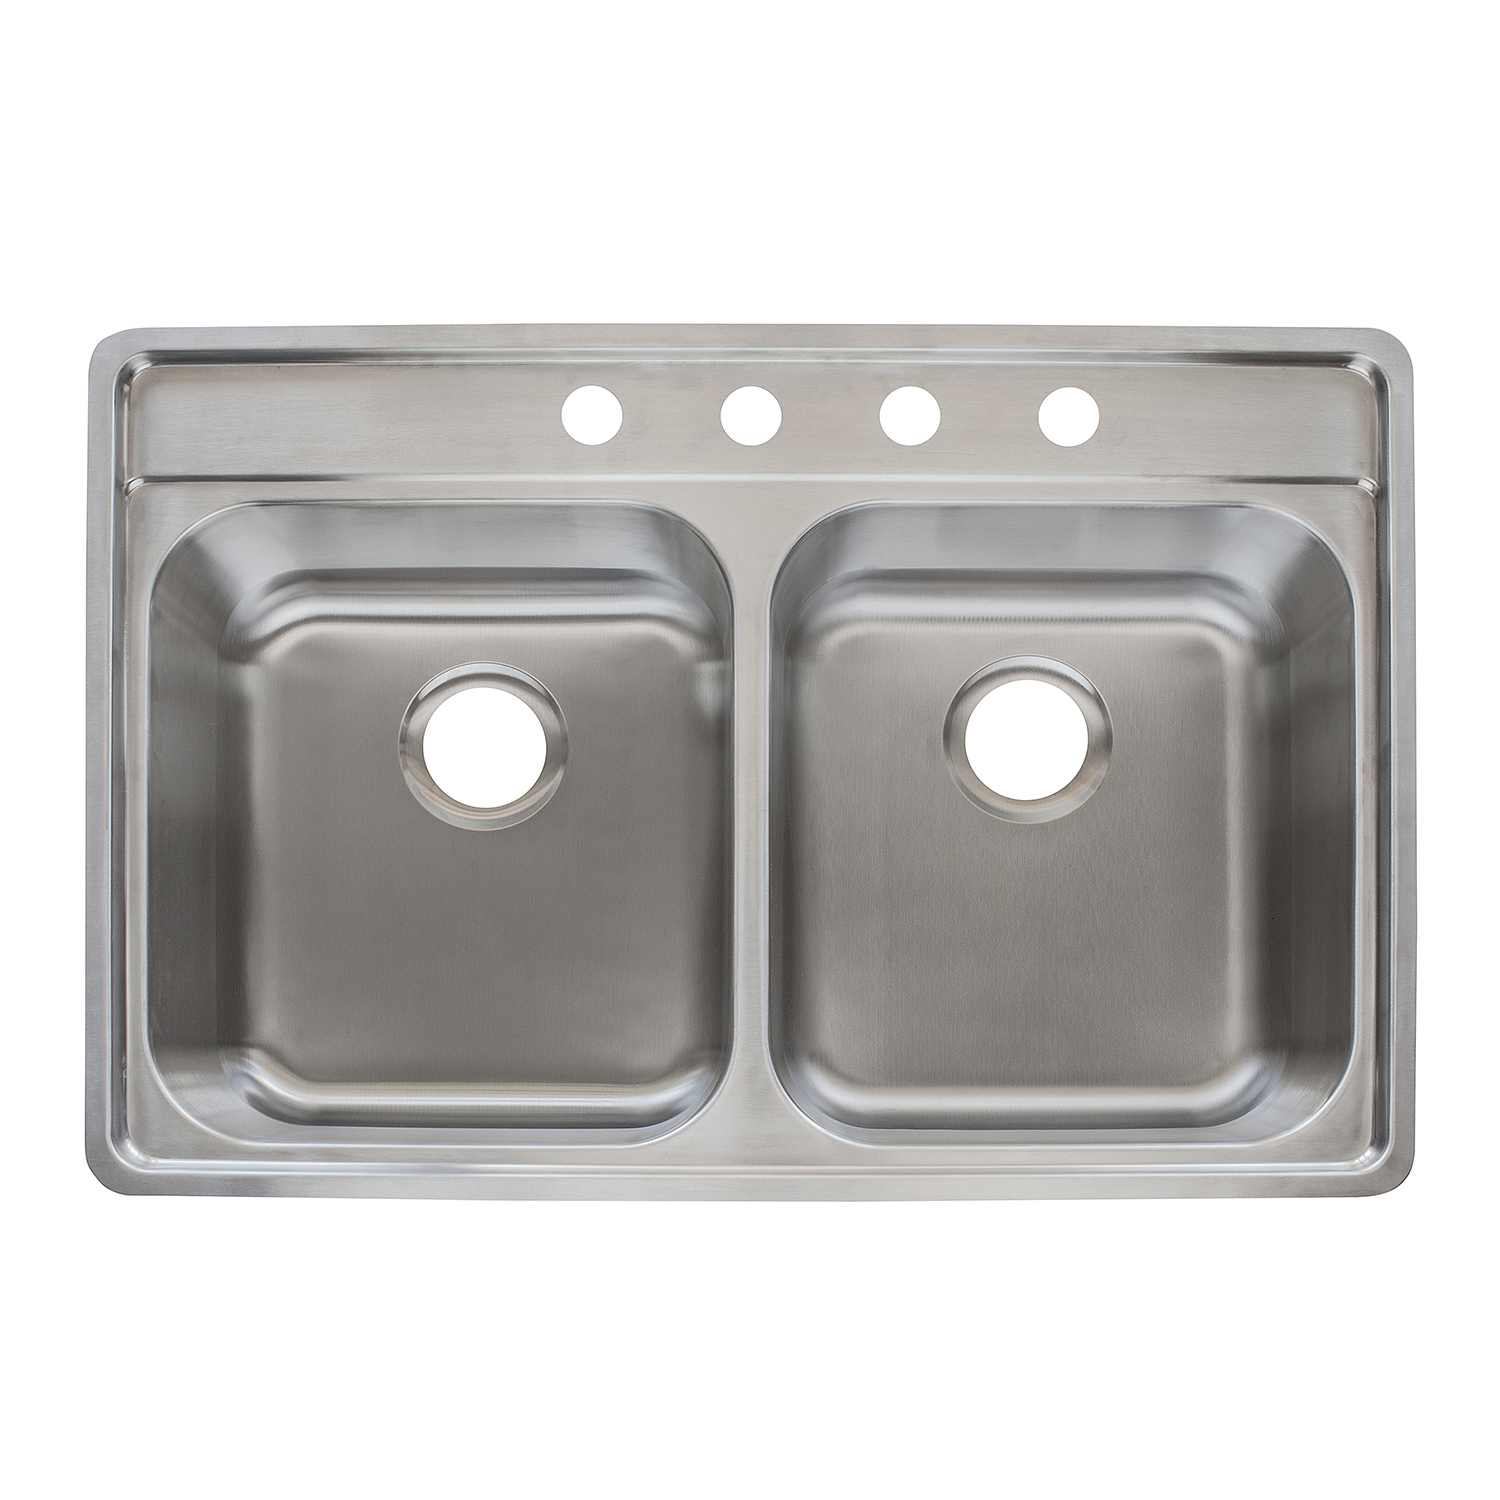 Franke Stainless Steel Top Mount 14.687 in. W X 18.187 in. L Double Bowl Kitchen Sink Silver - image 1 of 2